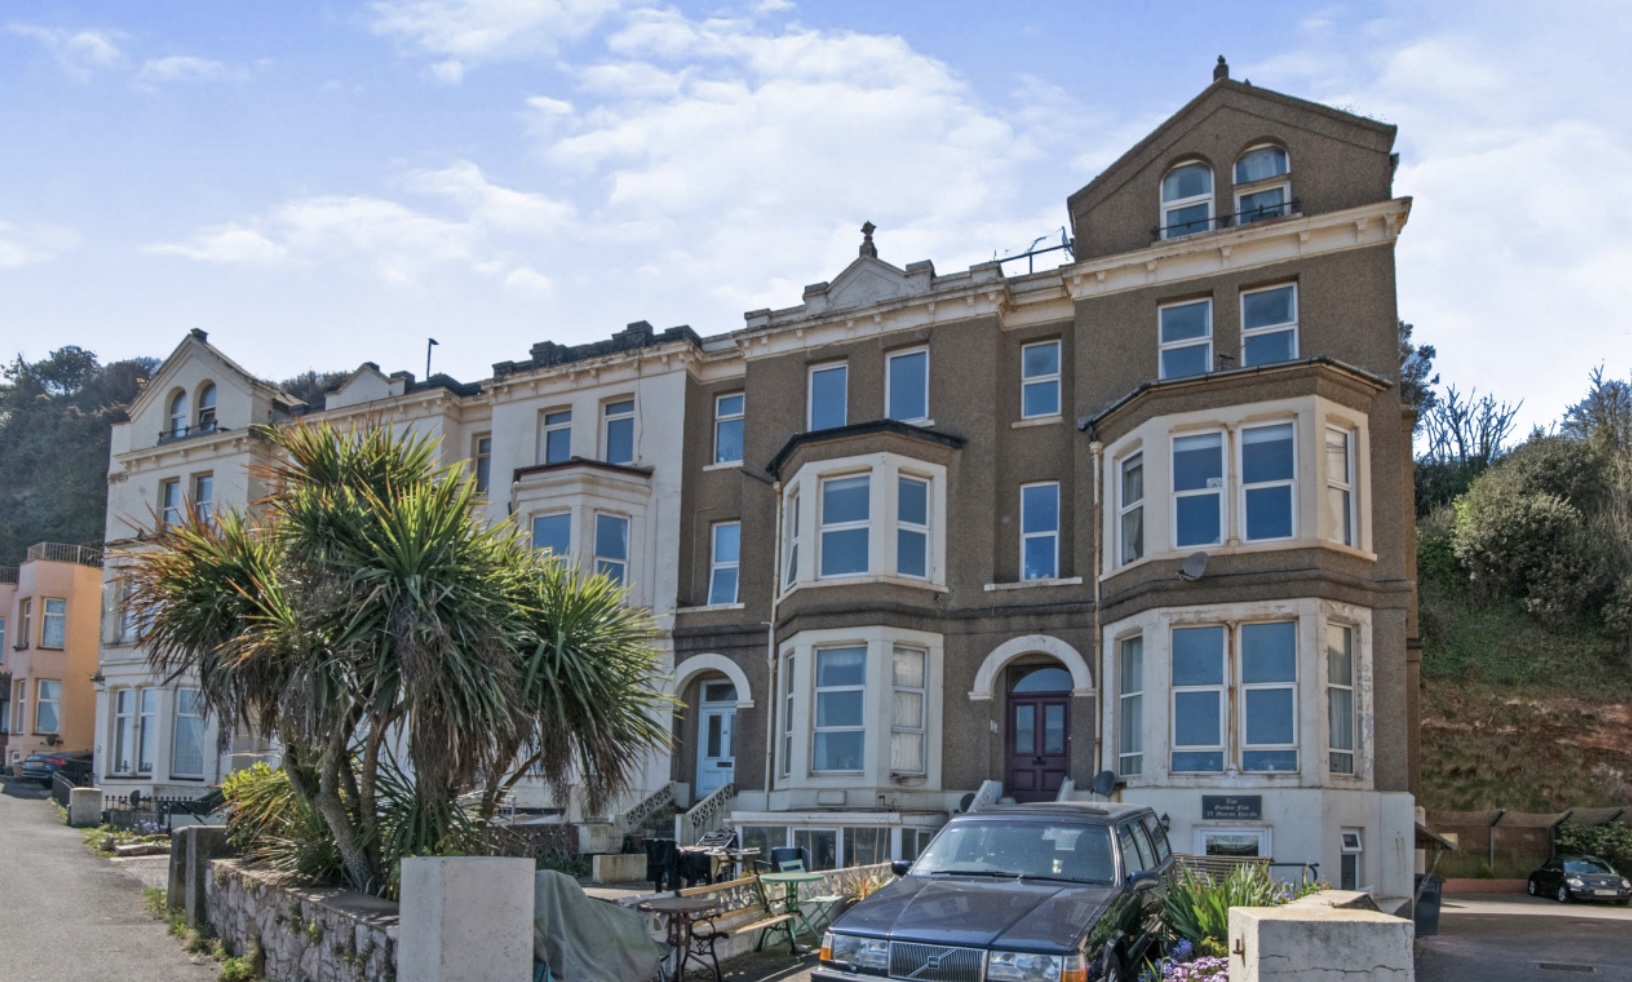 This week we're showcasing a two-bed flat on Marine Parade